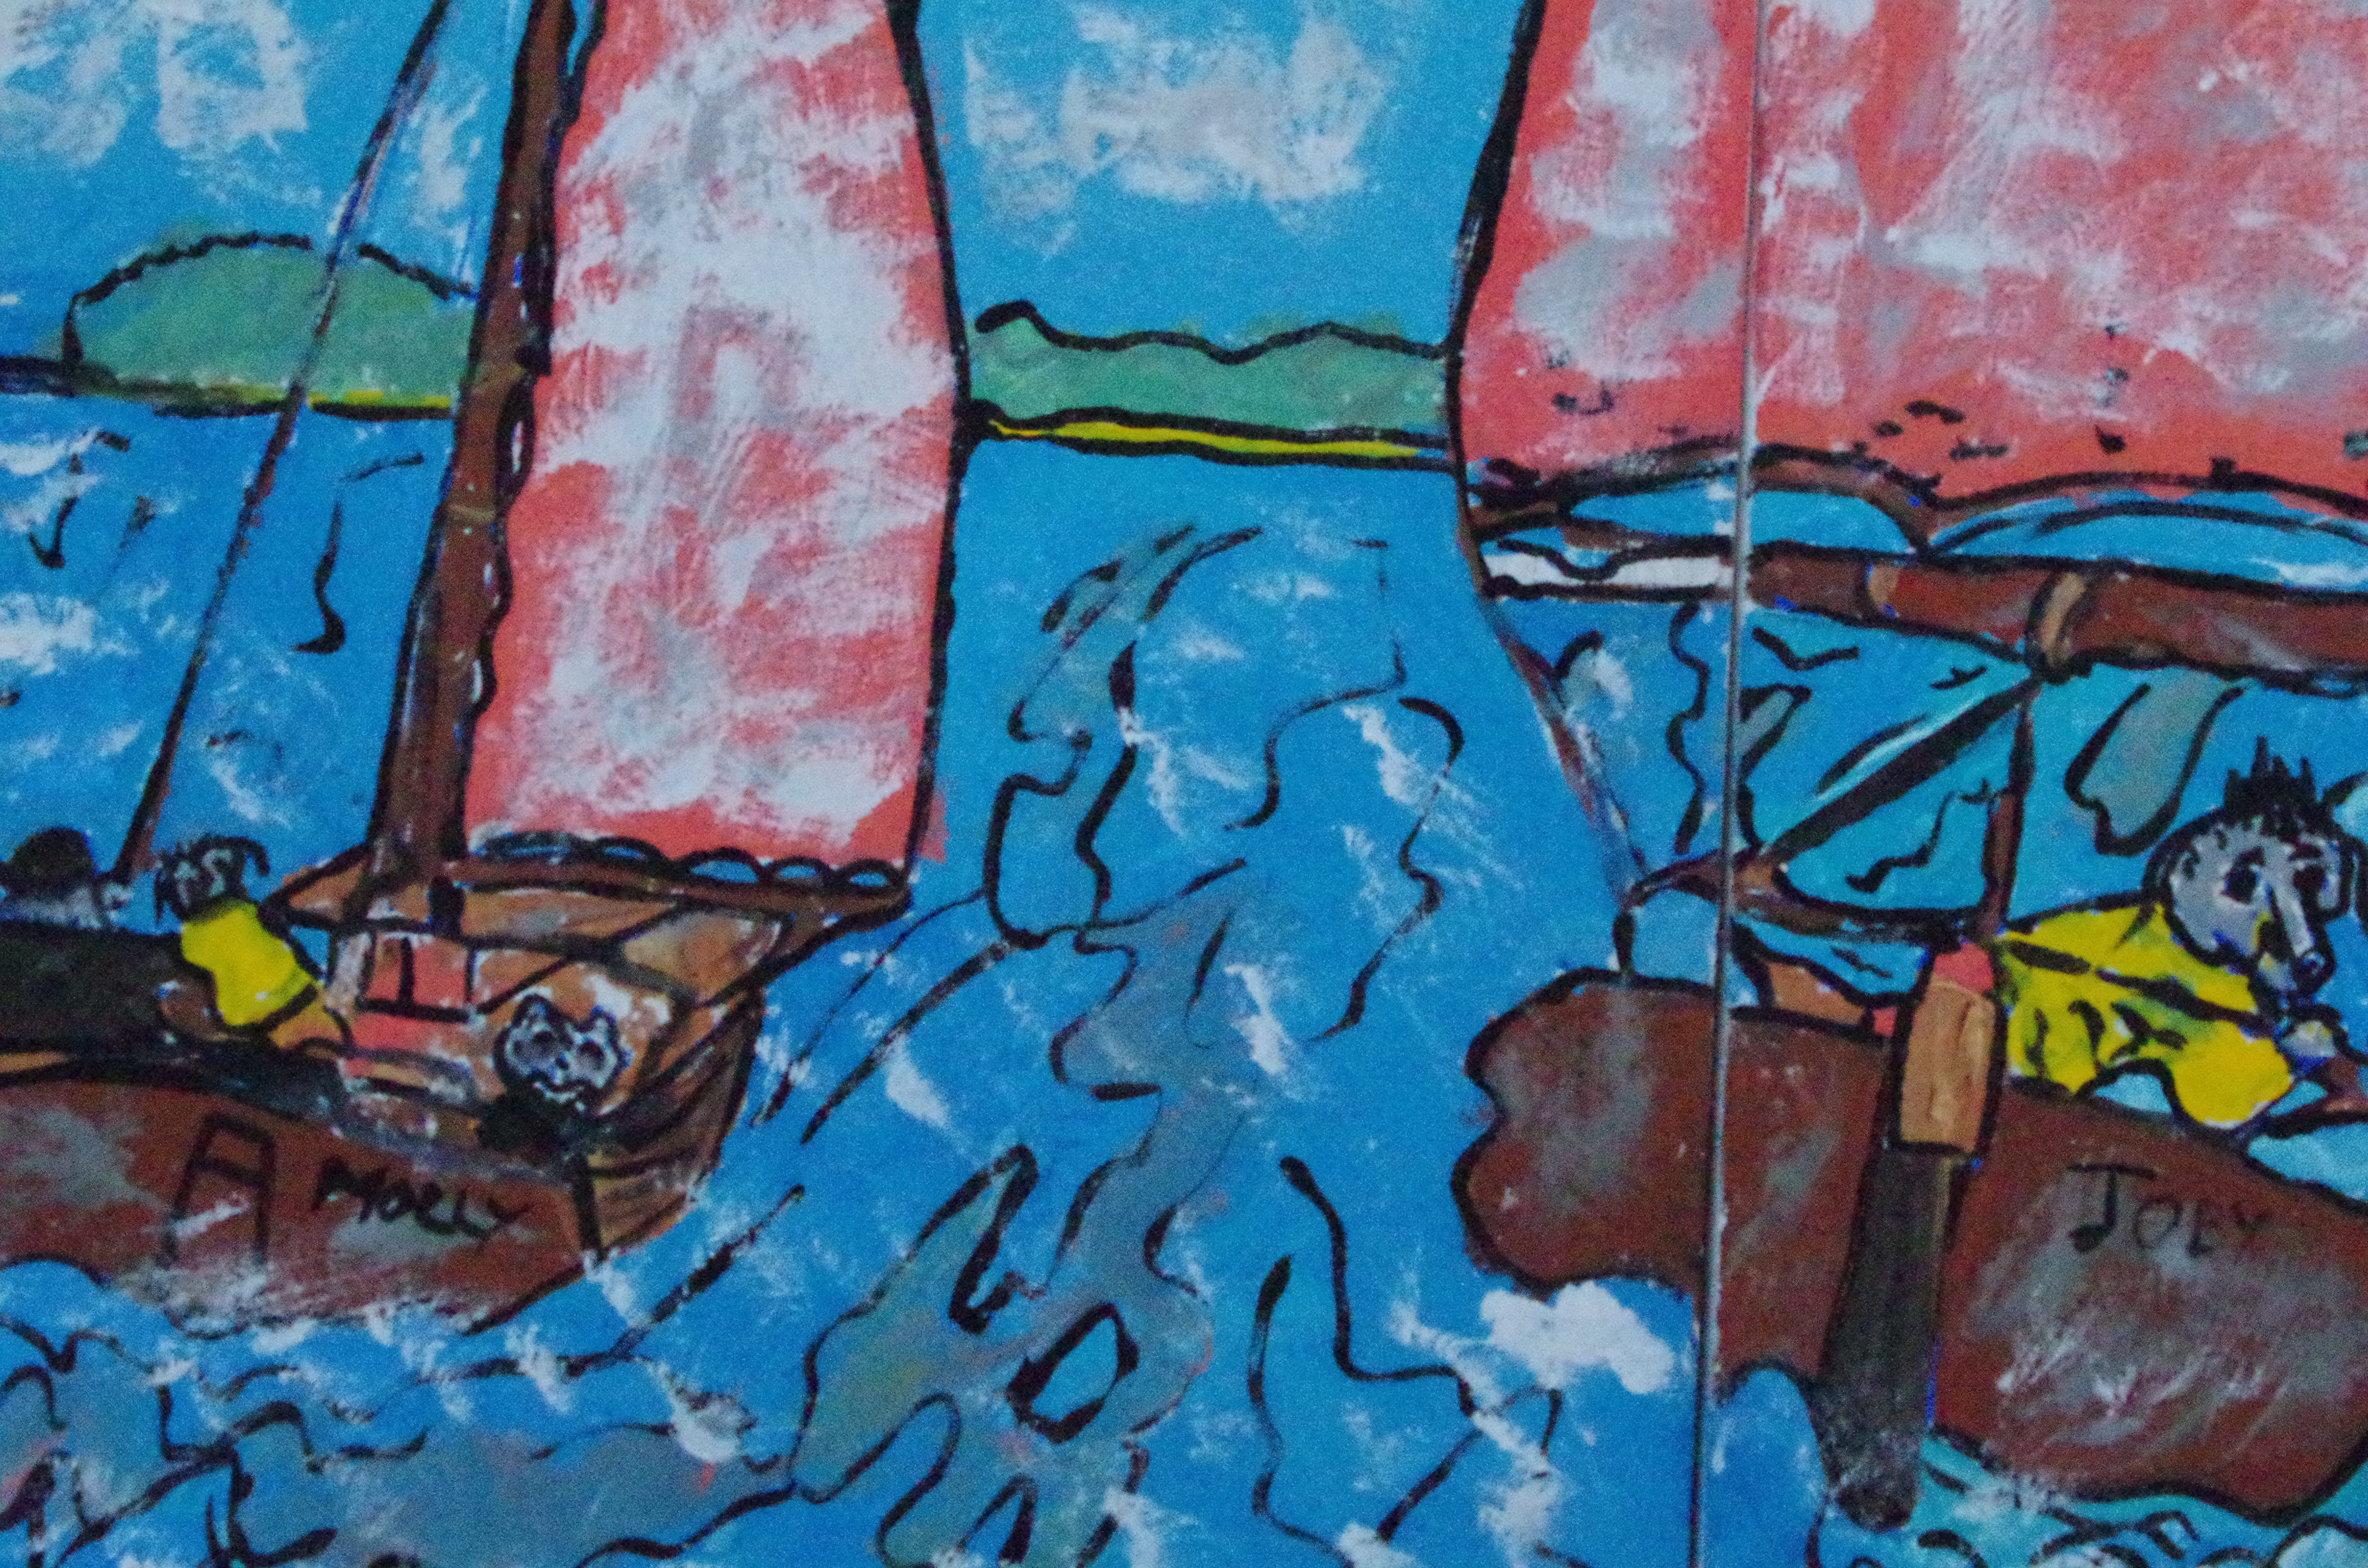 1/3rd of a 'Rupert sails' Triptych by BB Bango. Each 1/3rd 18 by 18inches acrylic on wood block £200 for the three